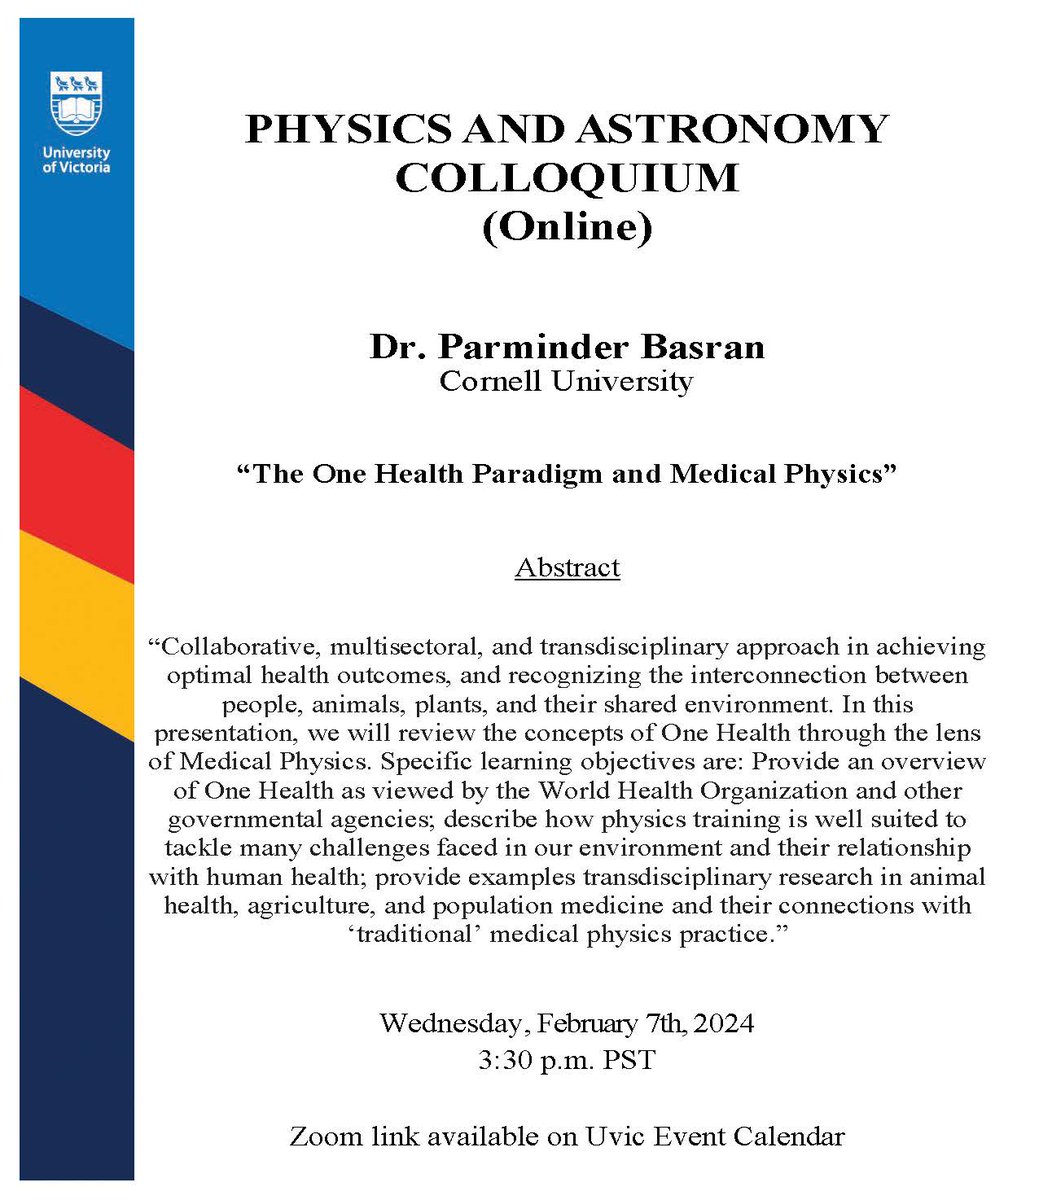 COLLOQUIUM (Online): Dr. Parminer Basran, Cornell University, will give an online colloquium on Wednesday February 7th at 3:30pm PST. For more information: events.uvic.ca/physics/event/…